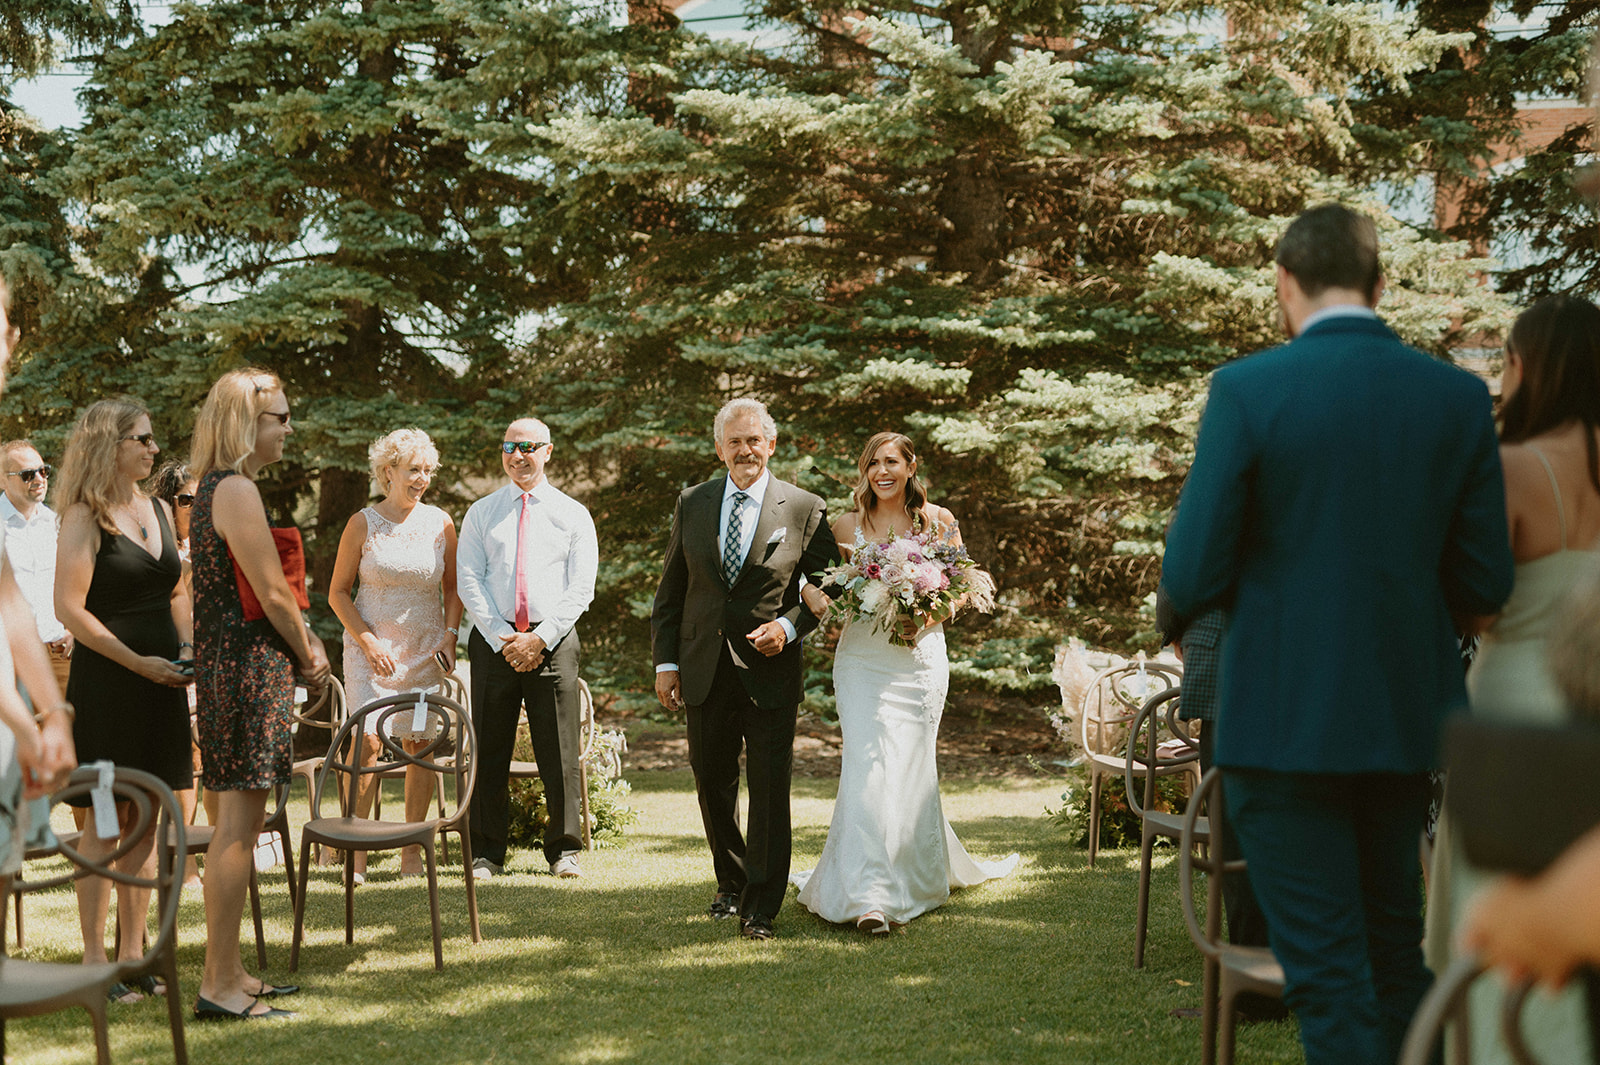 Father and bride walk down the aisle at this outdoor wedding ceremony at Deane House